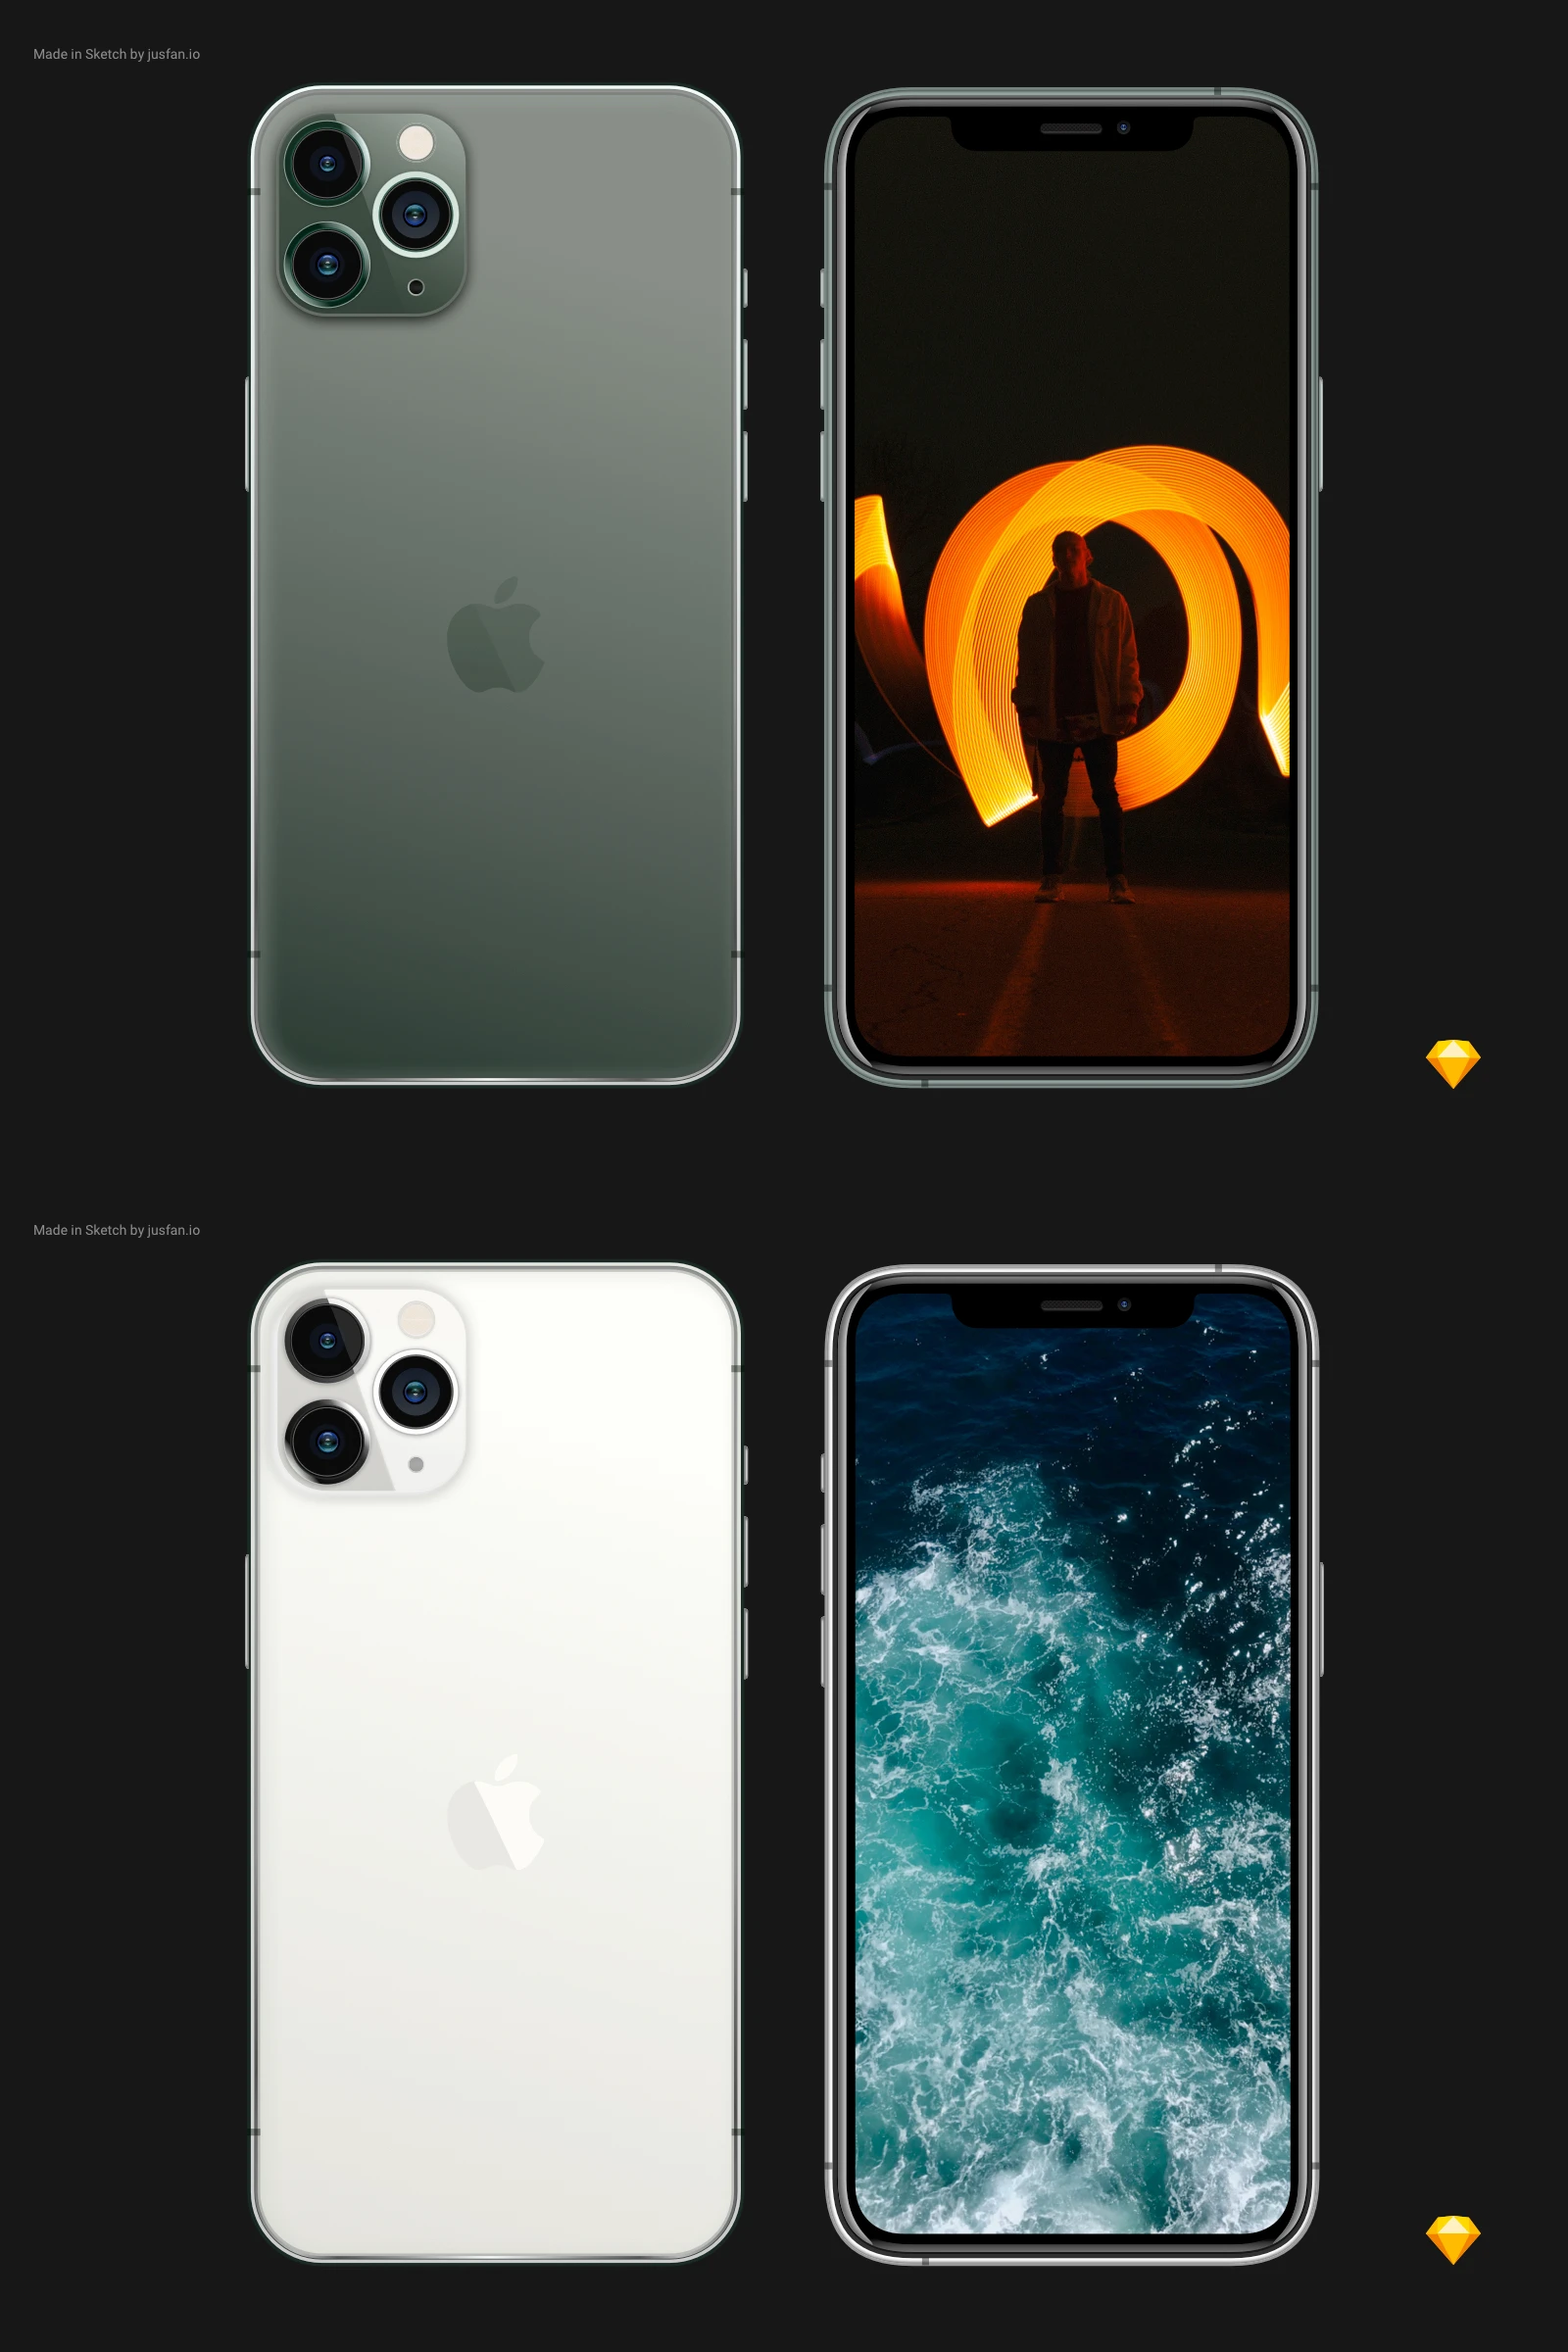 Free iPhone 11 Pro Mockup for Sketch - Feel free to use and modify for your needs.